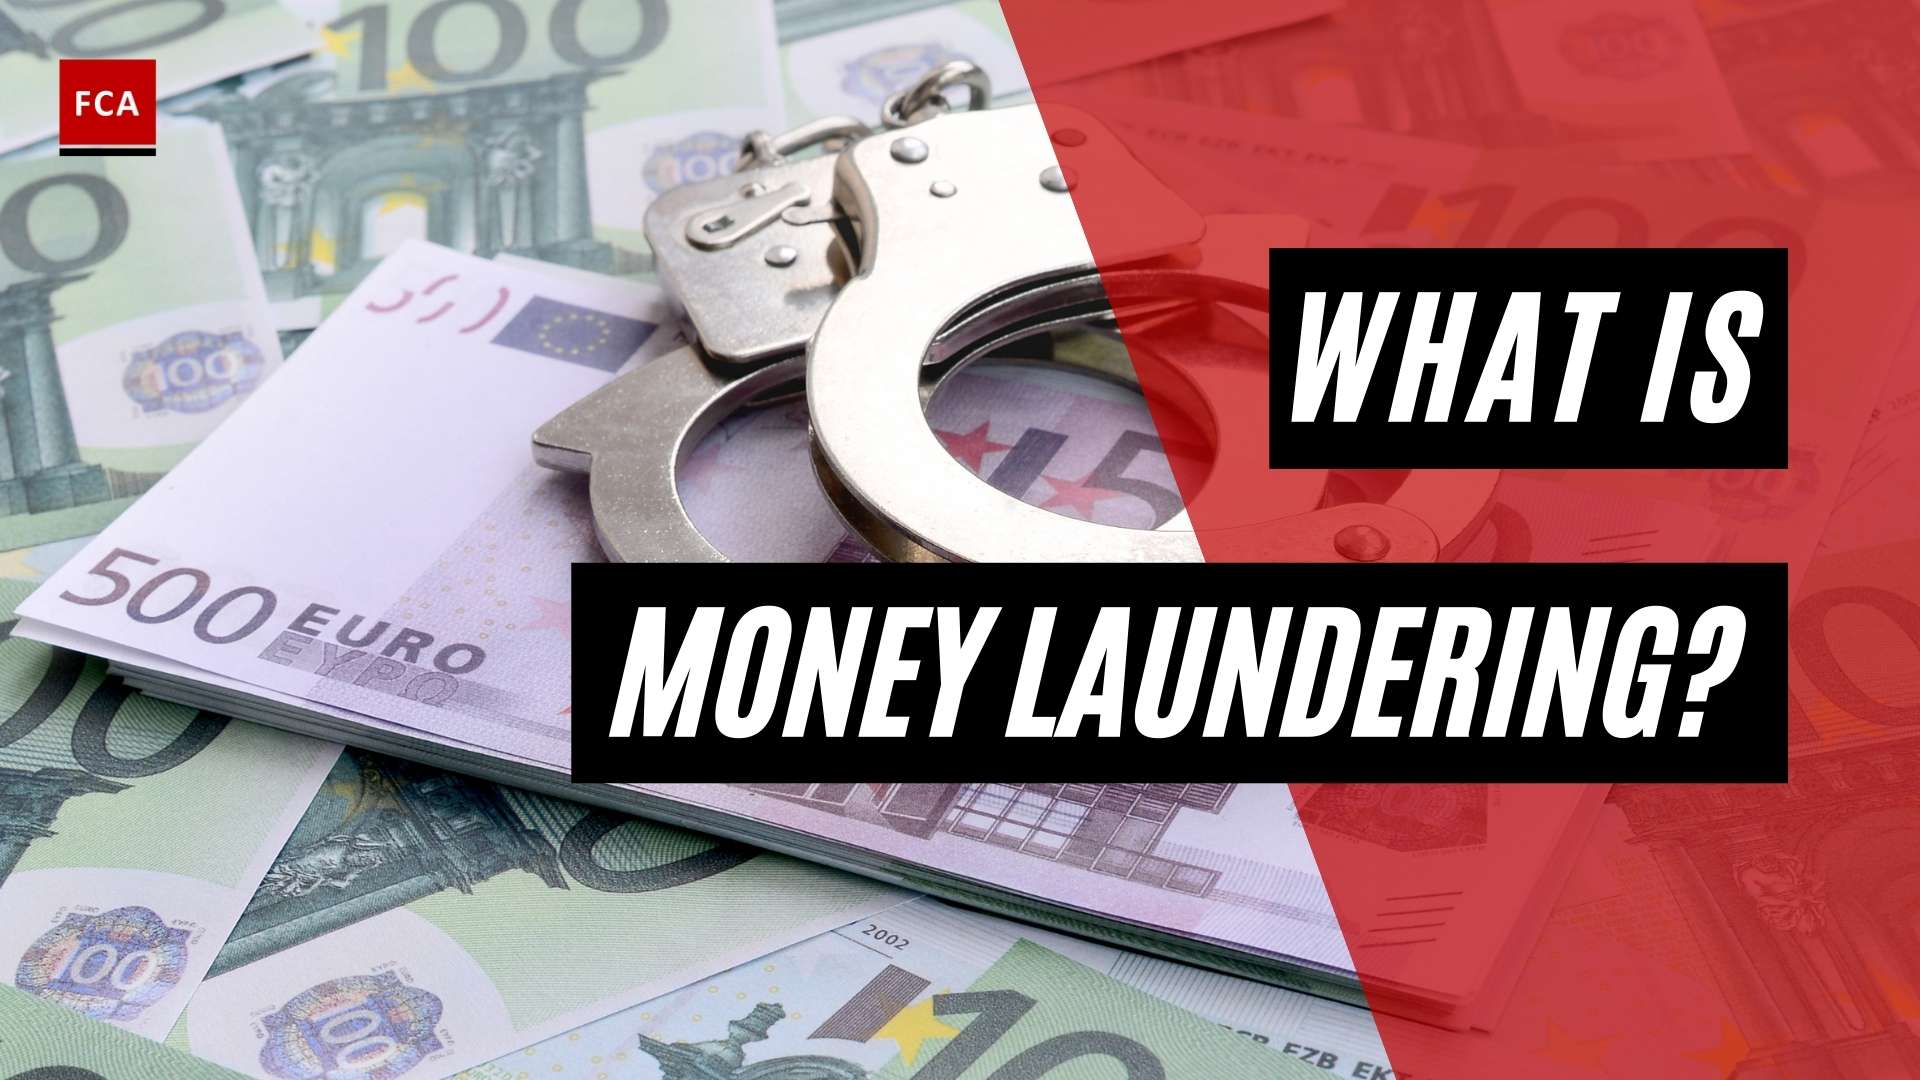 What Is Money Laundering?: Illicit Activities In The Financial Sector - Featured Image